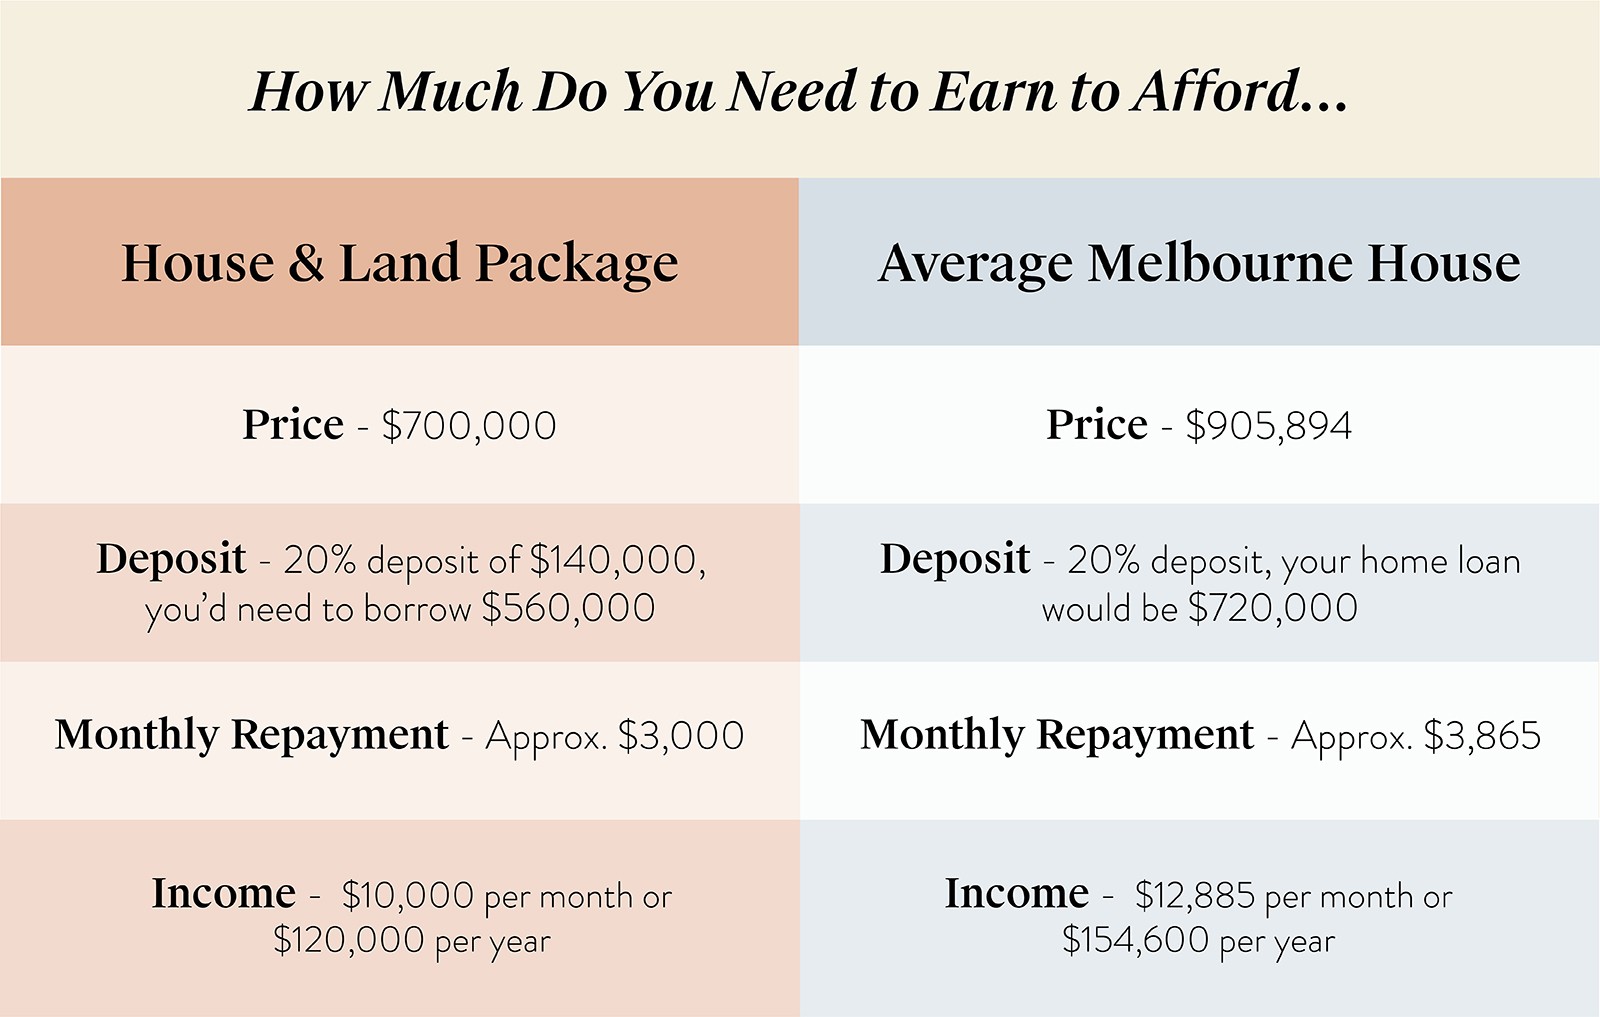 How Much Do You Need to Earn to Afford the Median Home?